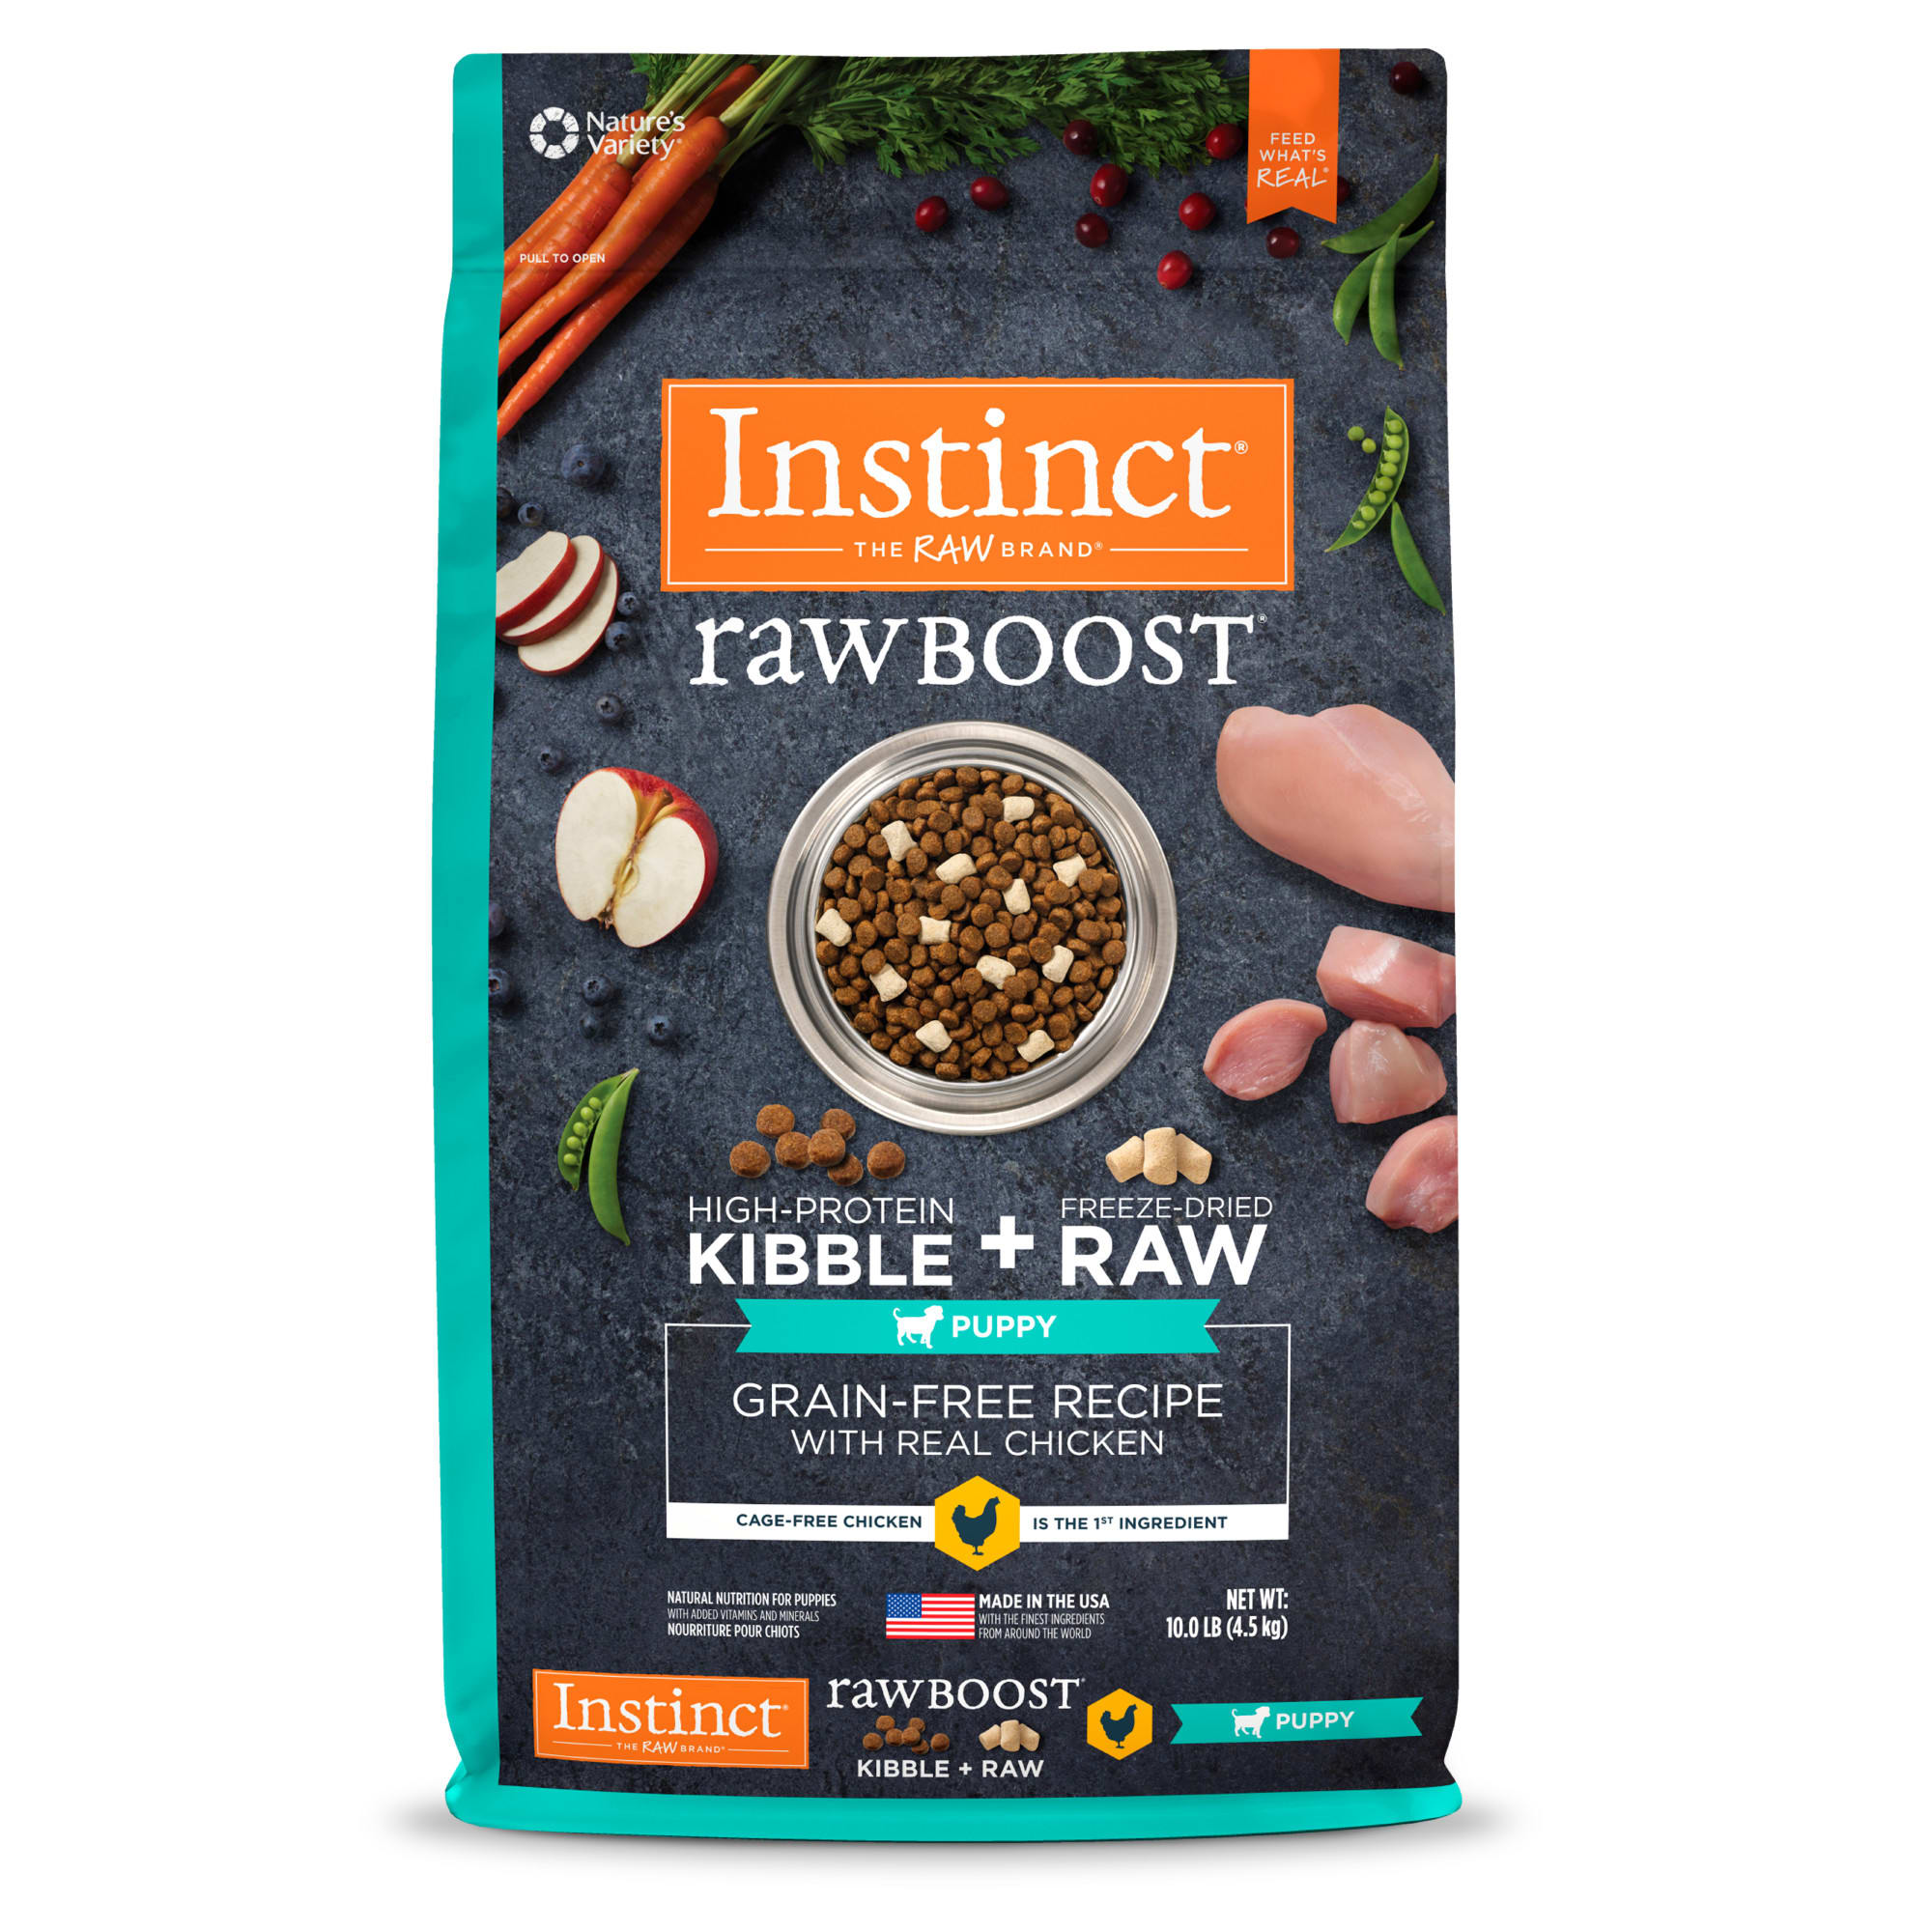 Instinct Raw Boost Puppy Grain Free Recipe with Real Chicken Natural Dry Dog Food